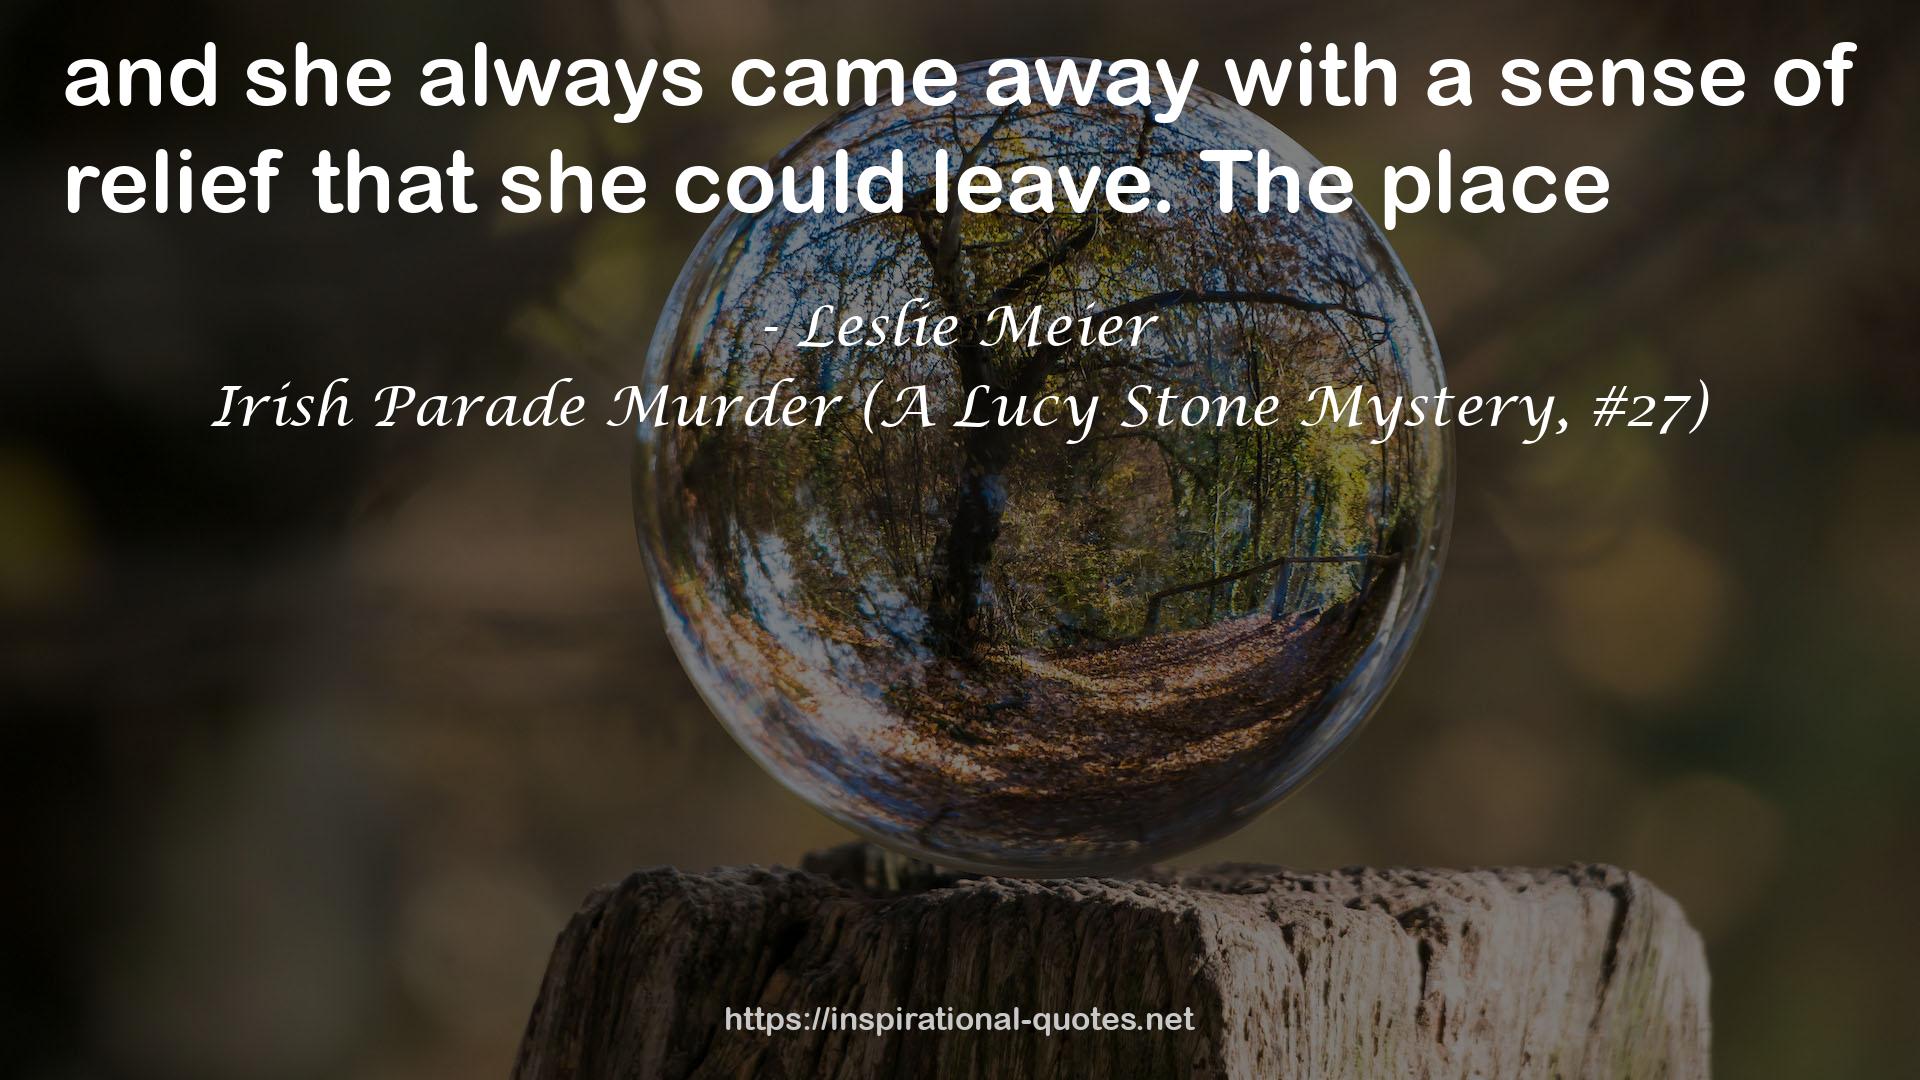 Irish Parade Murder (A Lucy Stone Mystery, #27) QUOTES